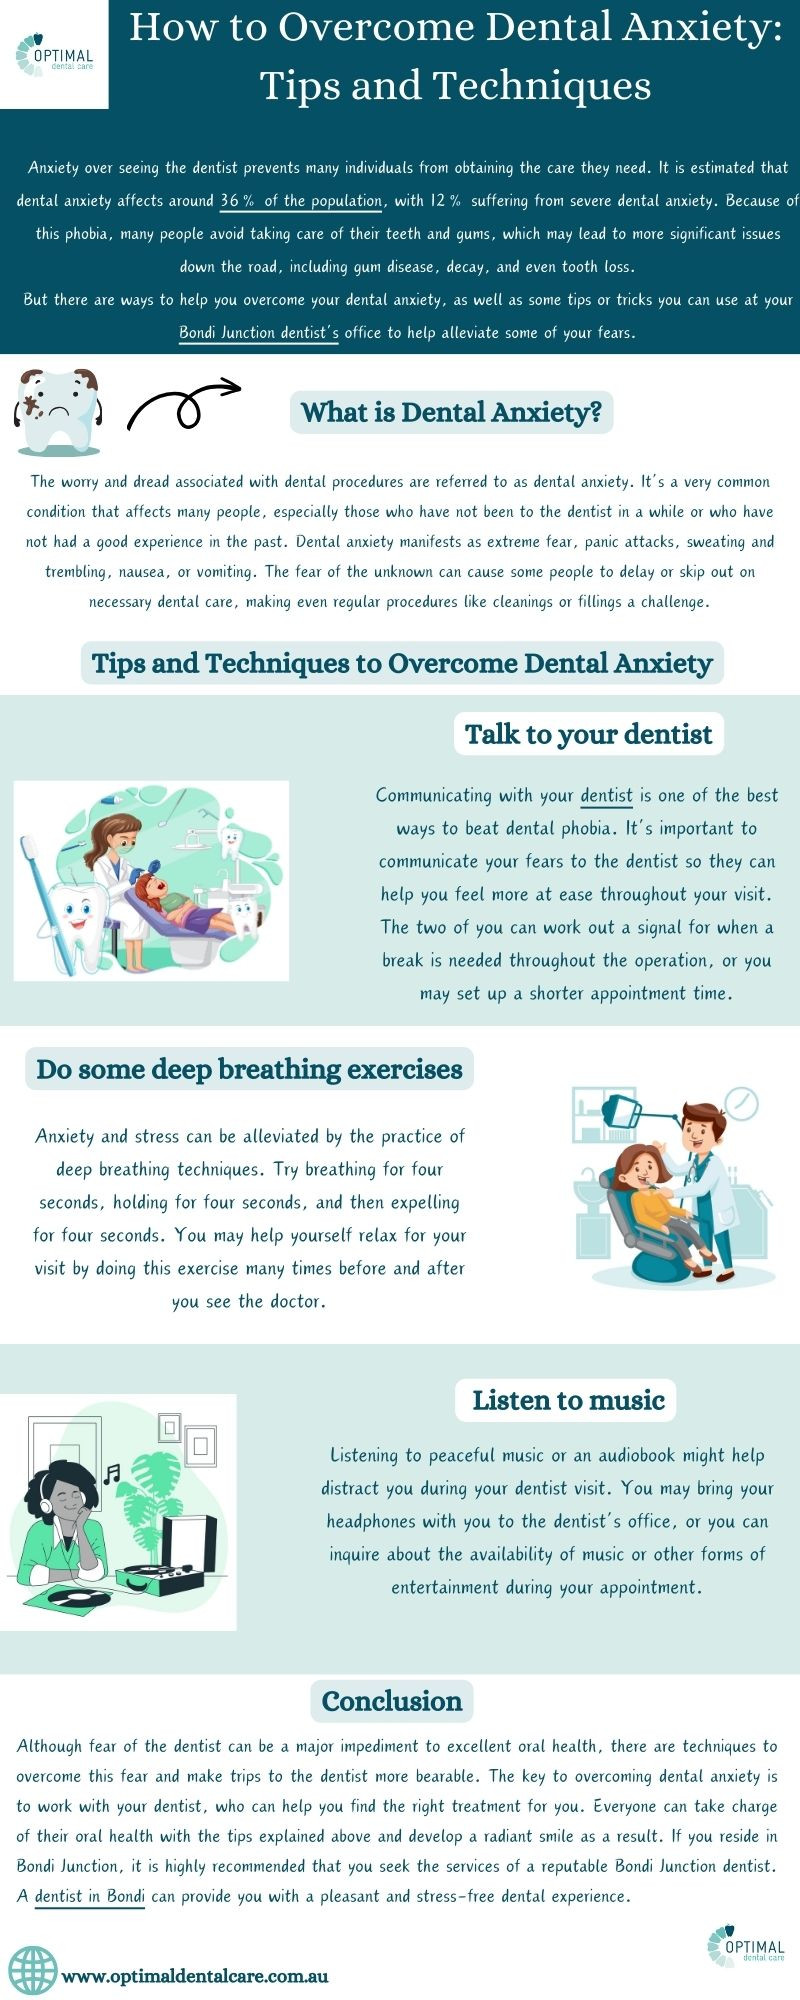 How to Overcome Dental Anxiety: Tips and Techniques